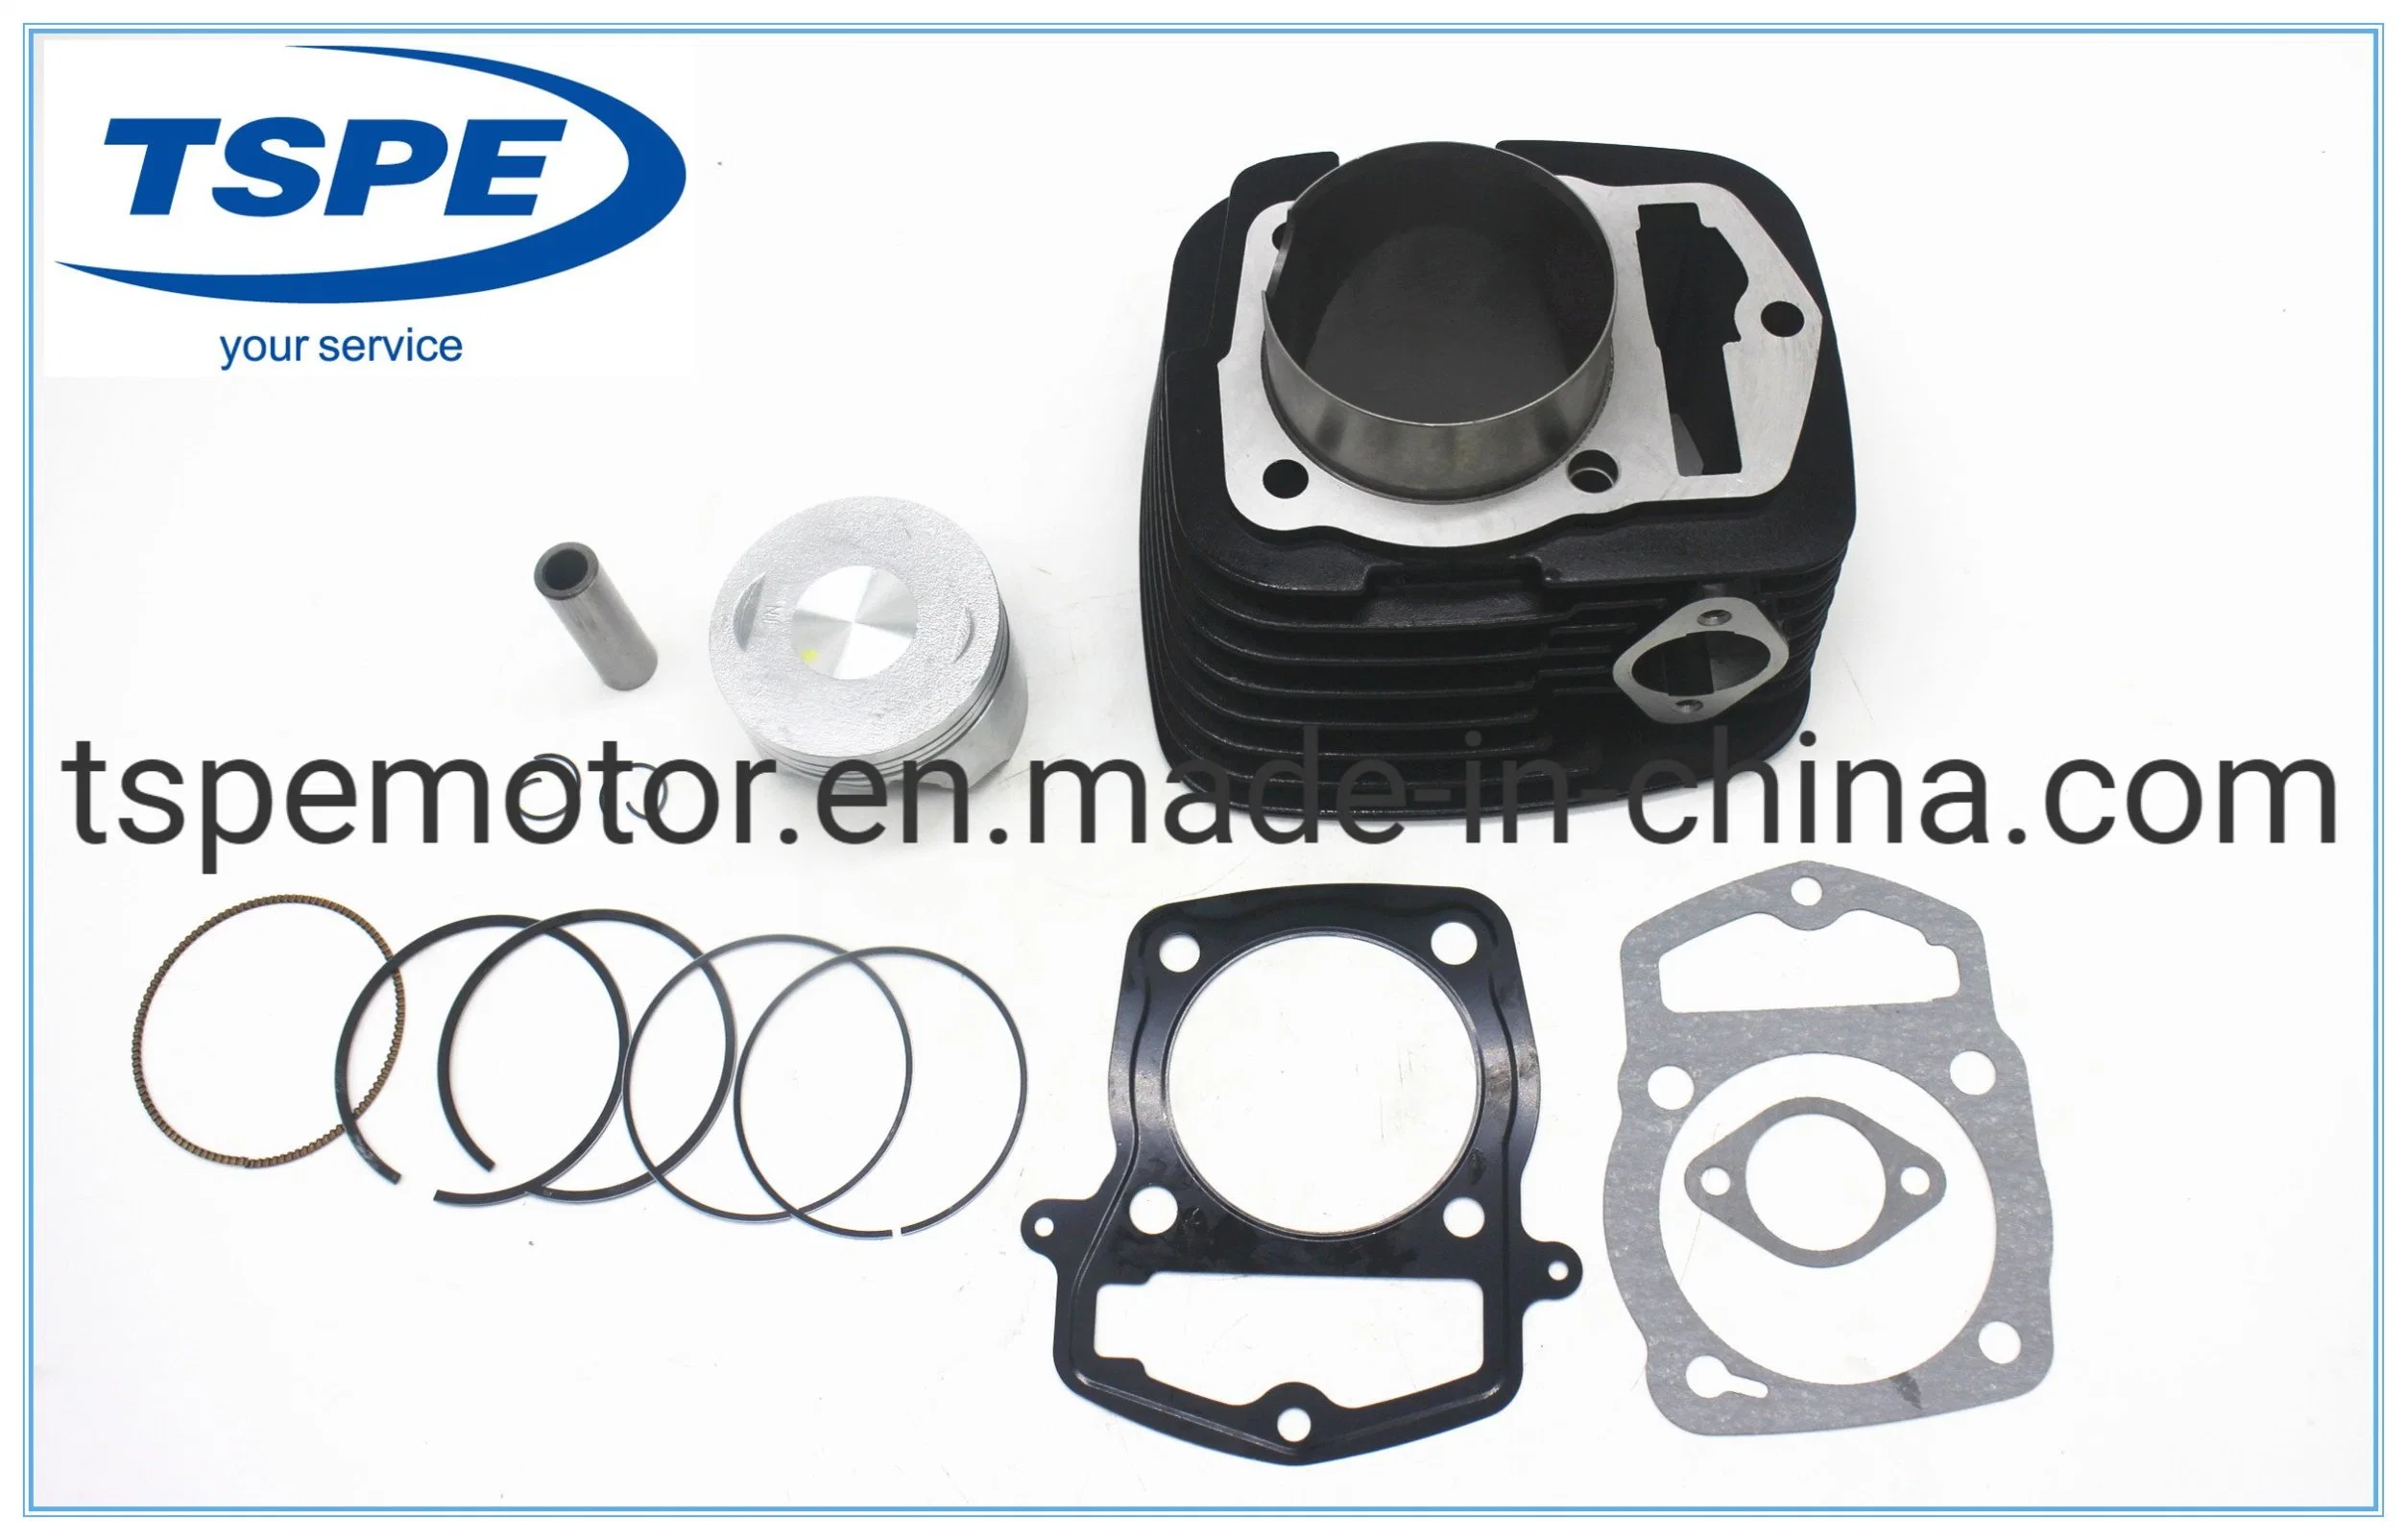 Engine Parts Motorcycle Cylinder Kit Motorcycle Parts for FT-250